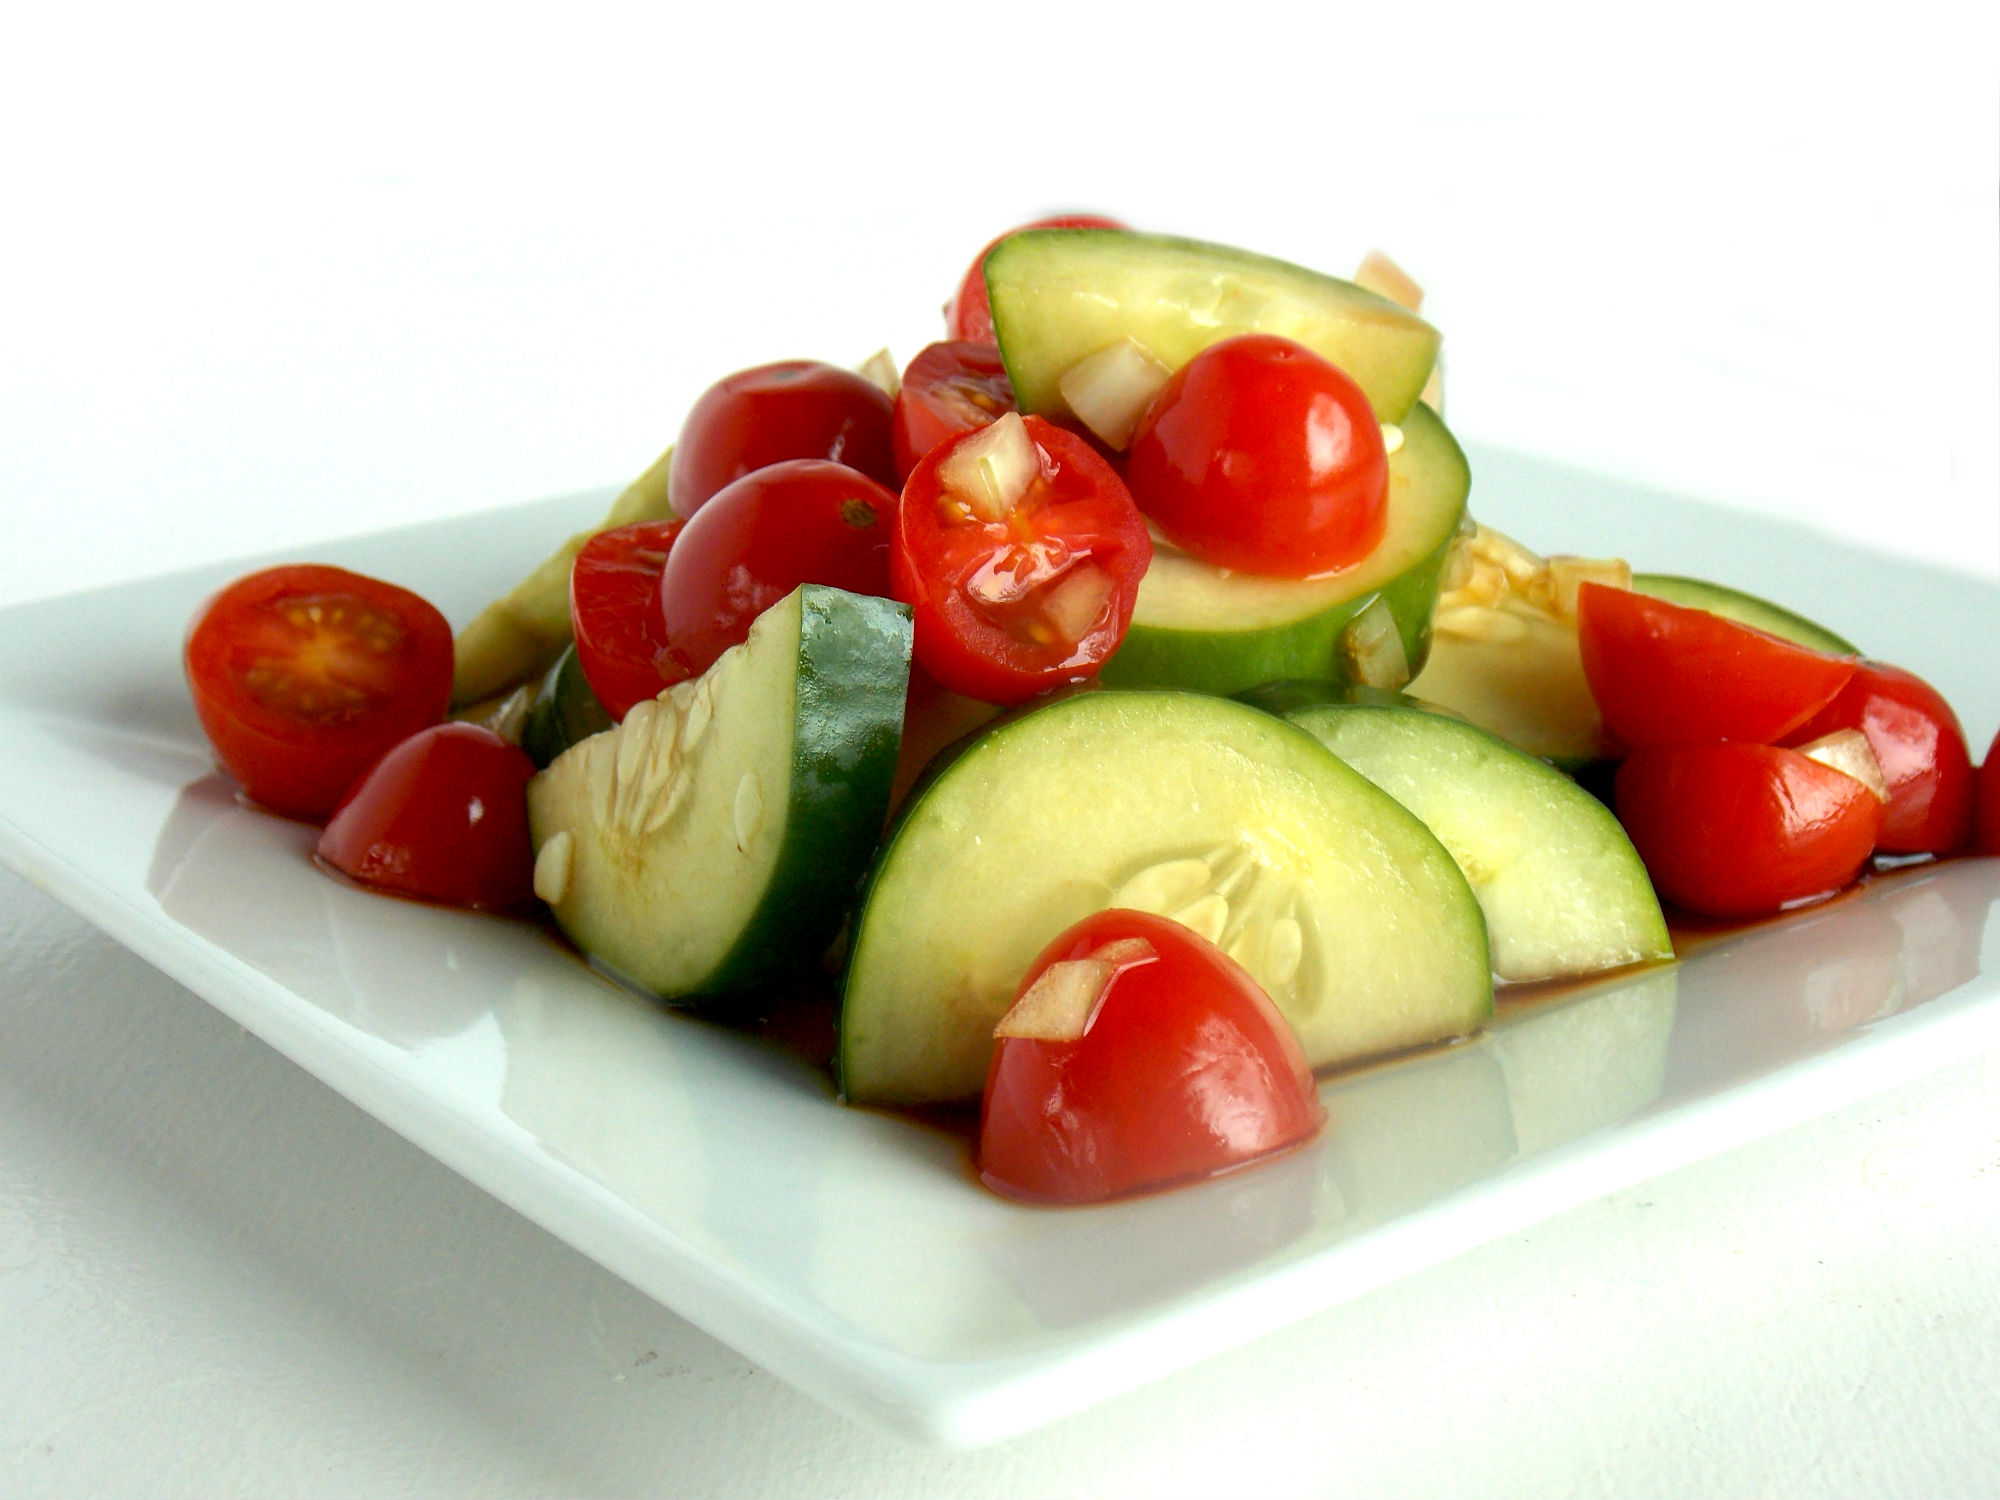 Tomato and Cucumber Salad | My Clean Kitchen